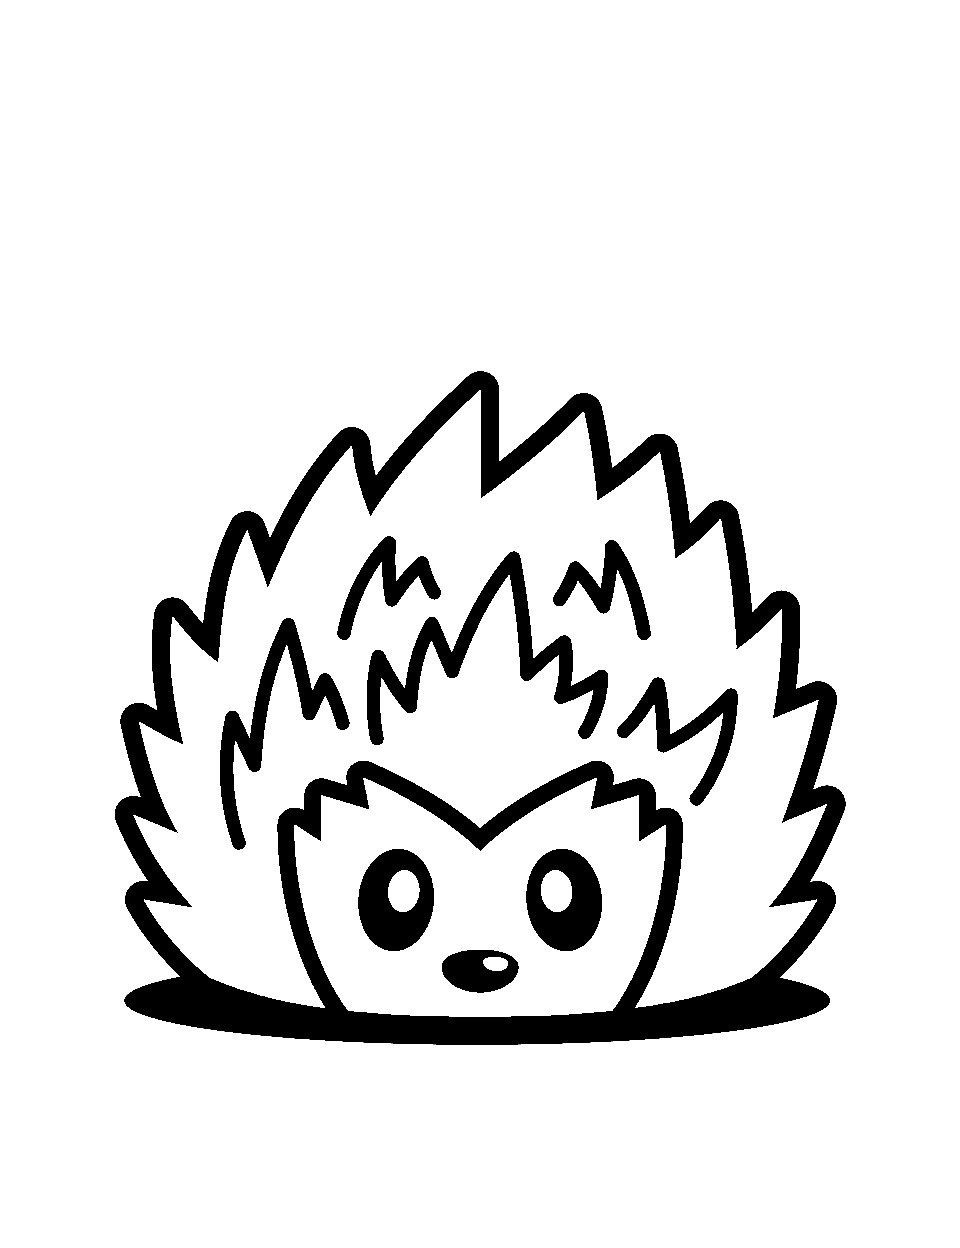 Happy Hedgehog Coloring Page - A simple outline hedgehog curled up in a ball.